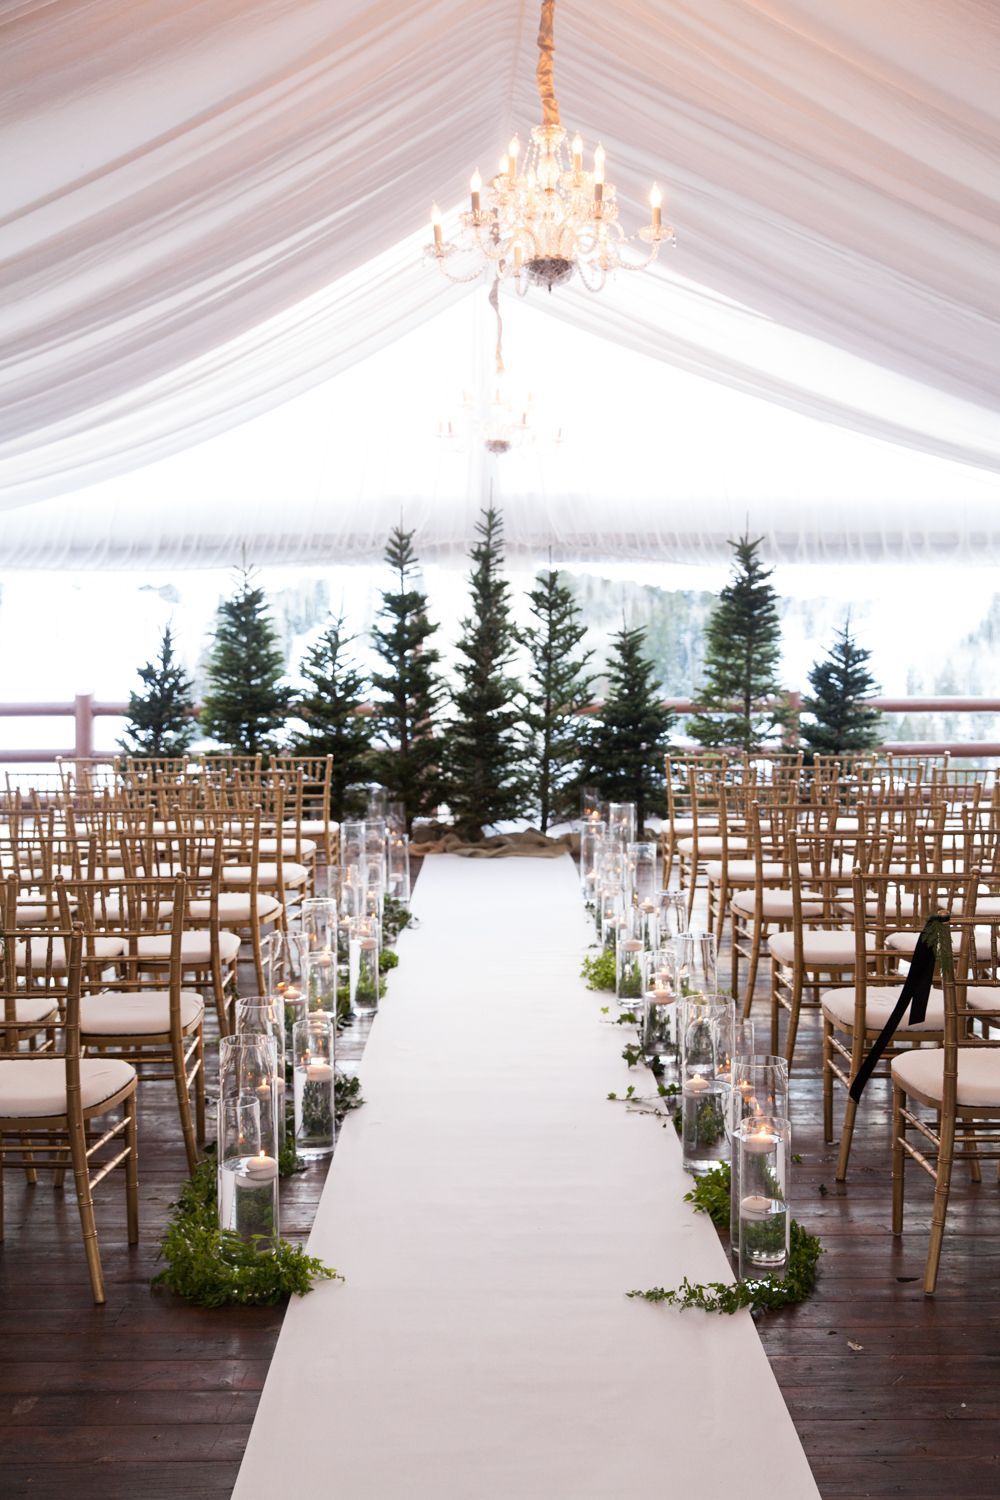 Tented wedding ceremony with evergreen trees and candles | Winter wedding at Stein